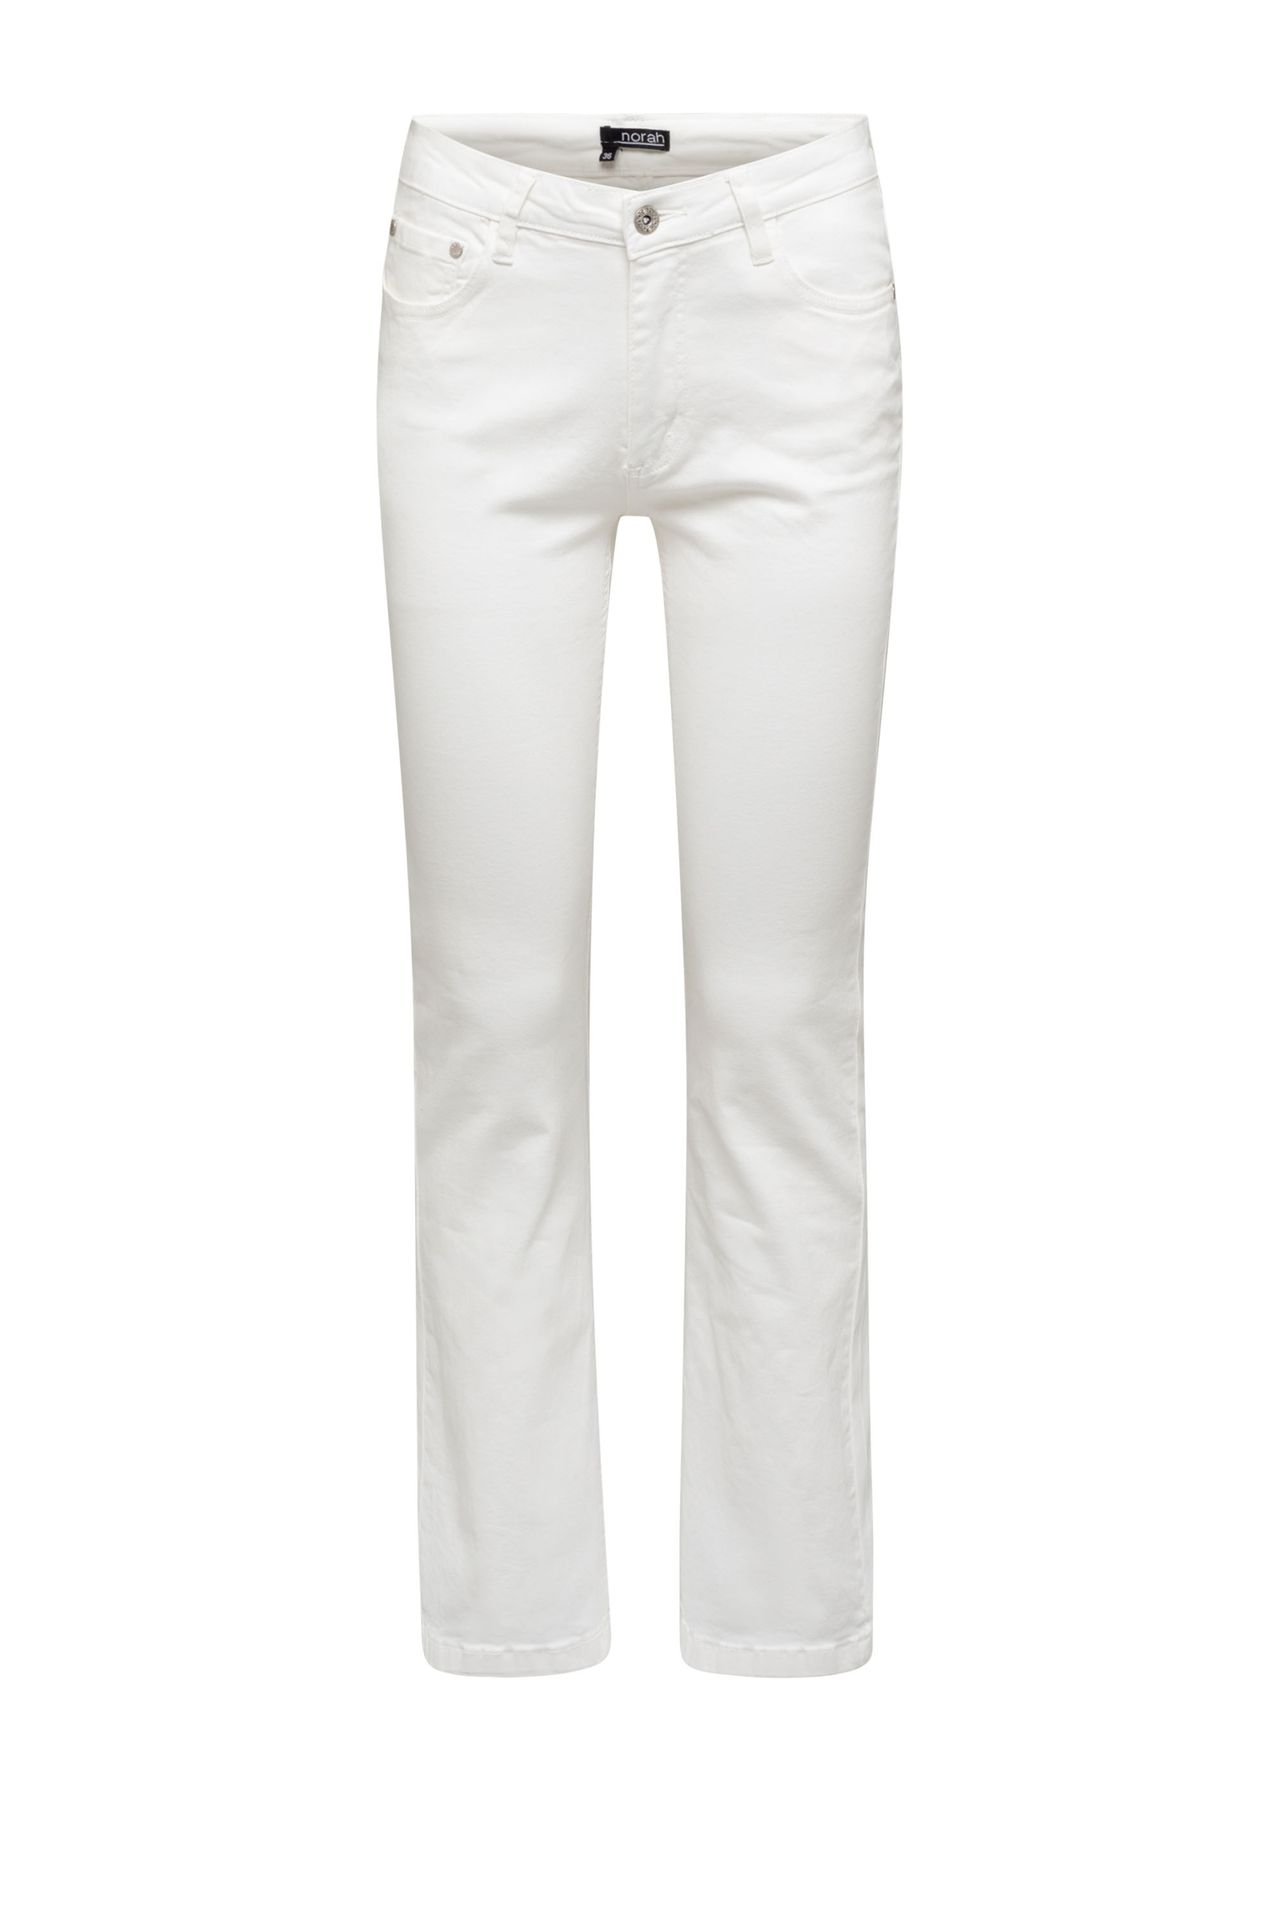 Norah Witte flared jeans white 212358-100